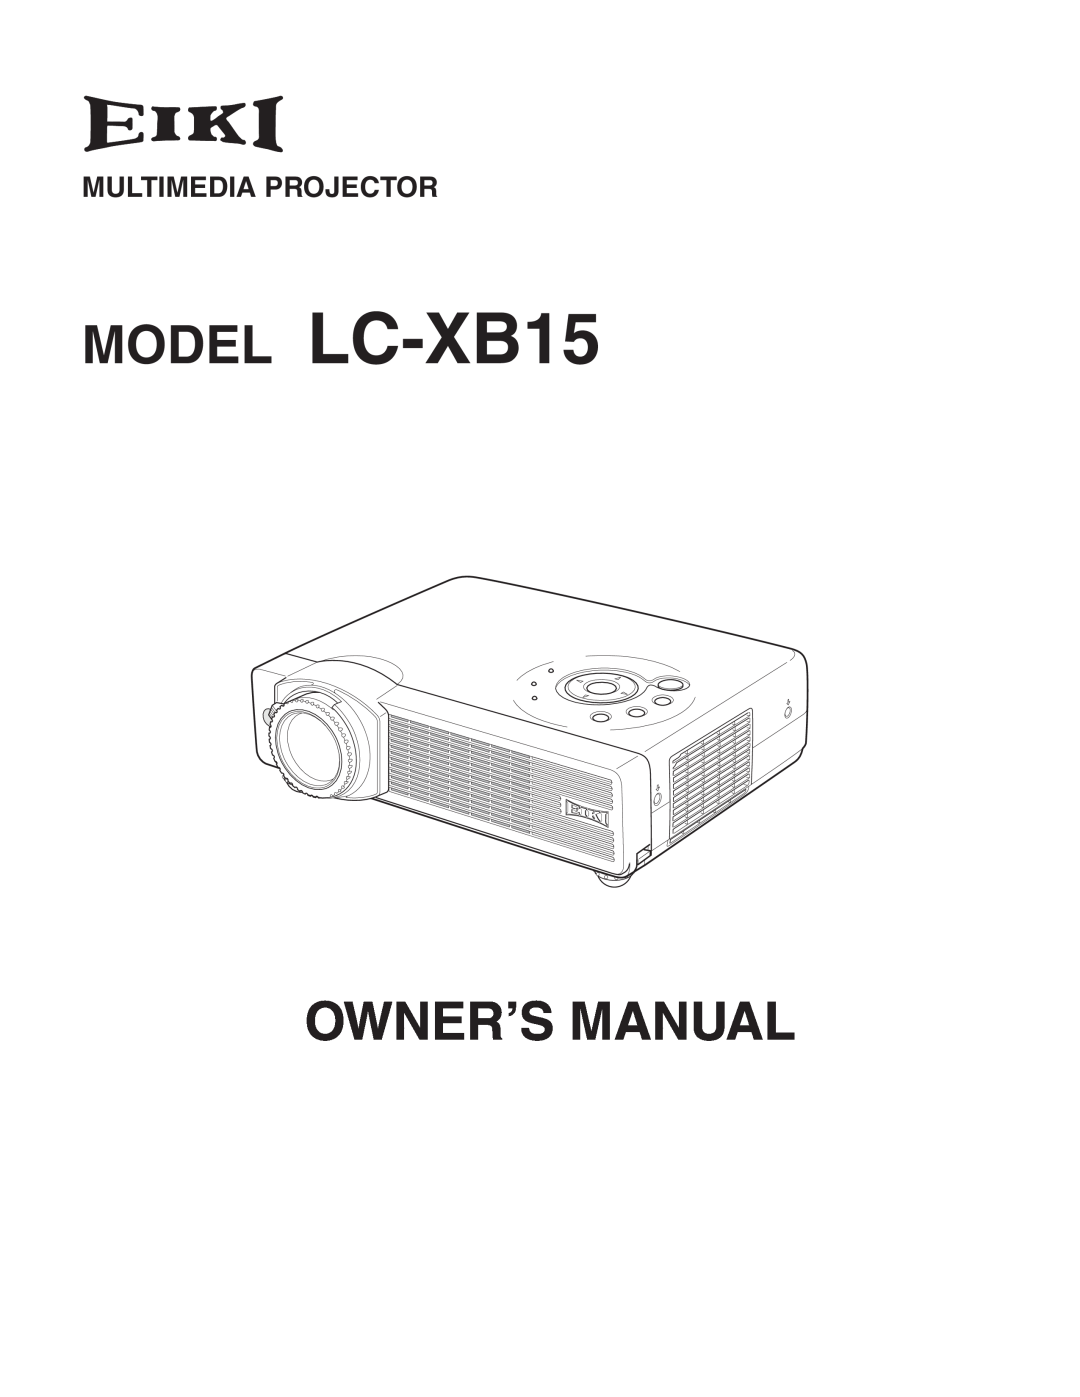 Eiki owner manual MODEL LC-XB15, Owner’S Manual, Multimedia Projector 